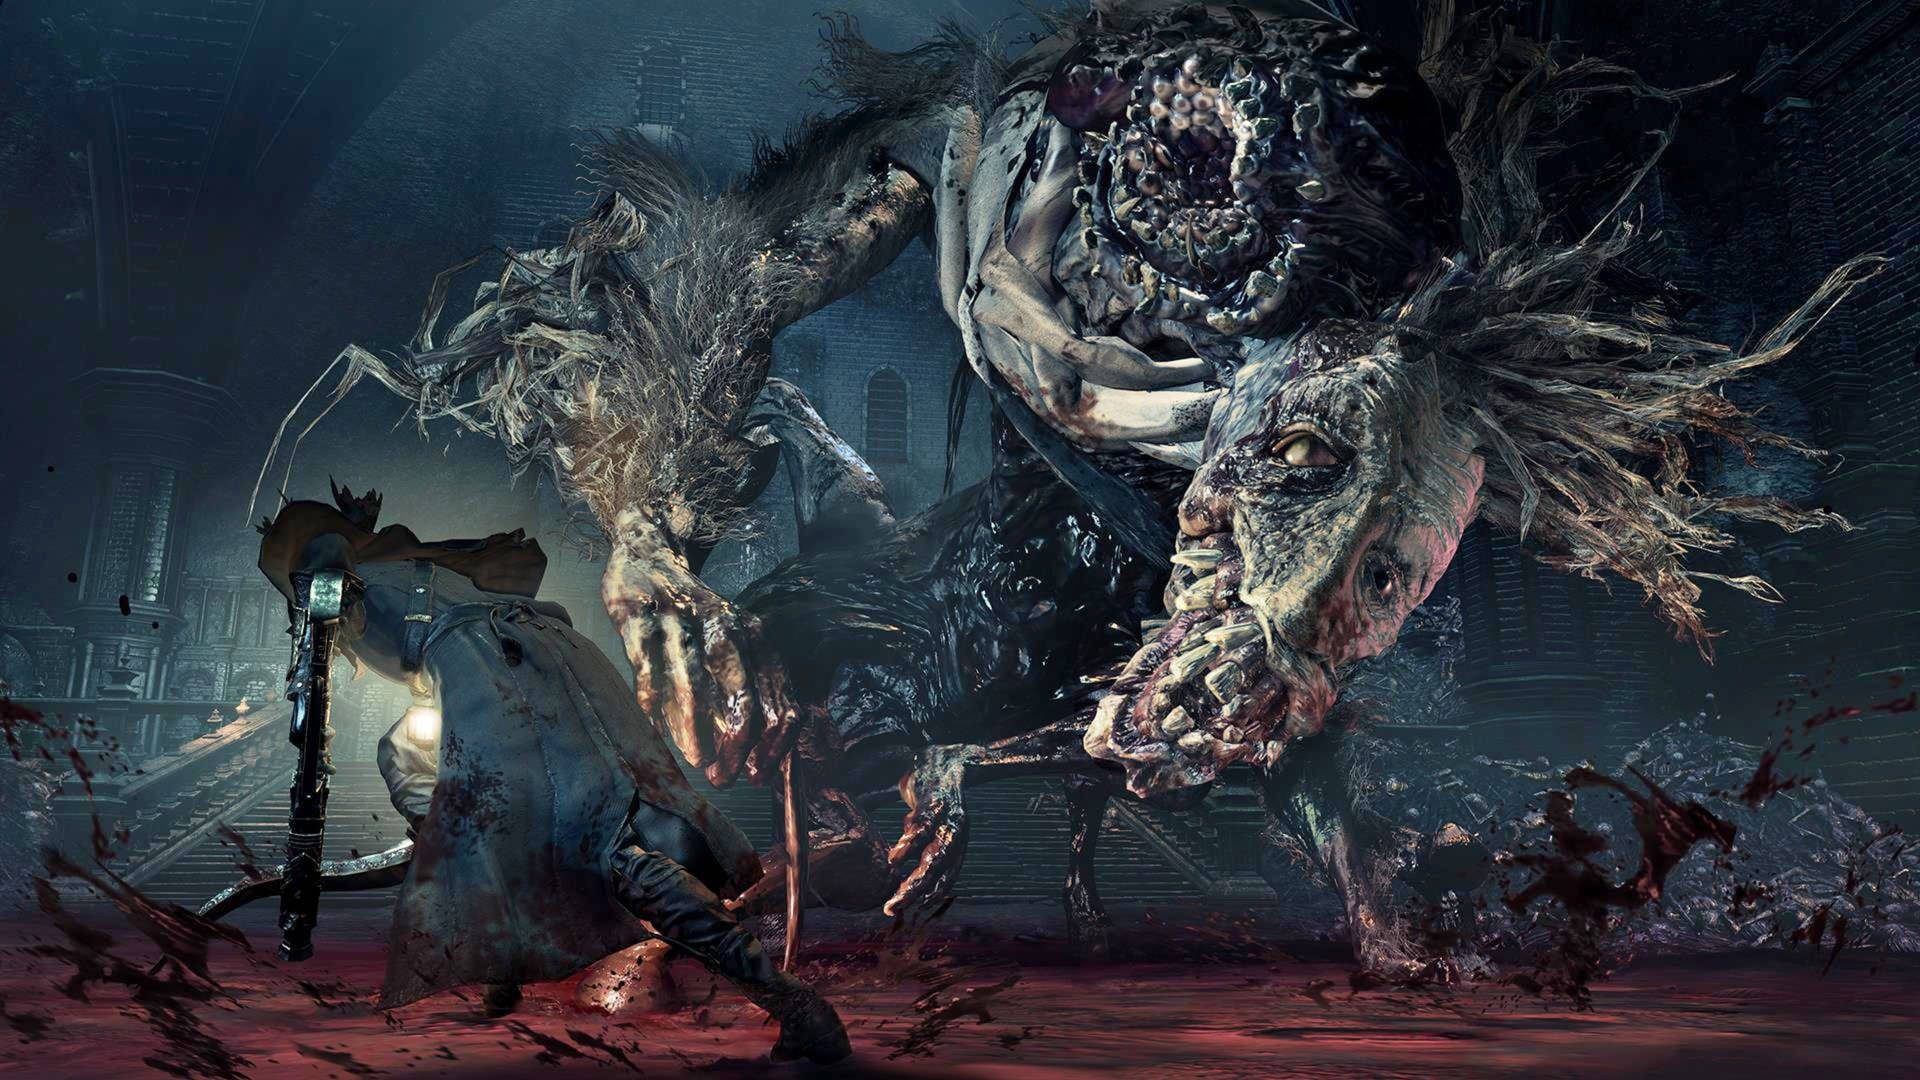 “One Hunter's Battle: A Duel between Ludwig and the Hunter from Bloodborne.” Wallpaper